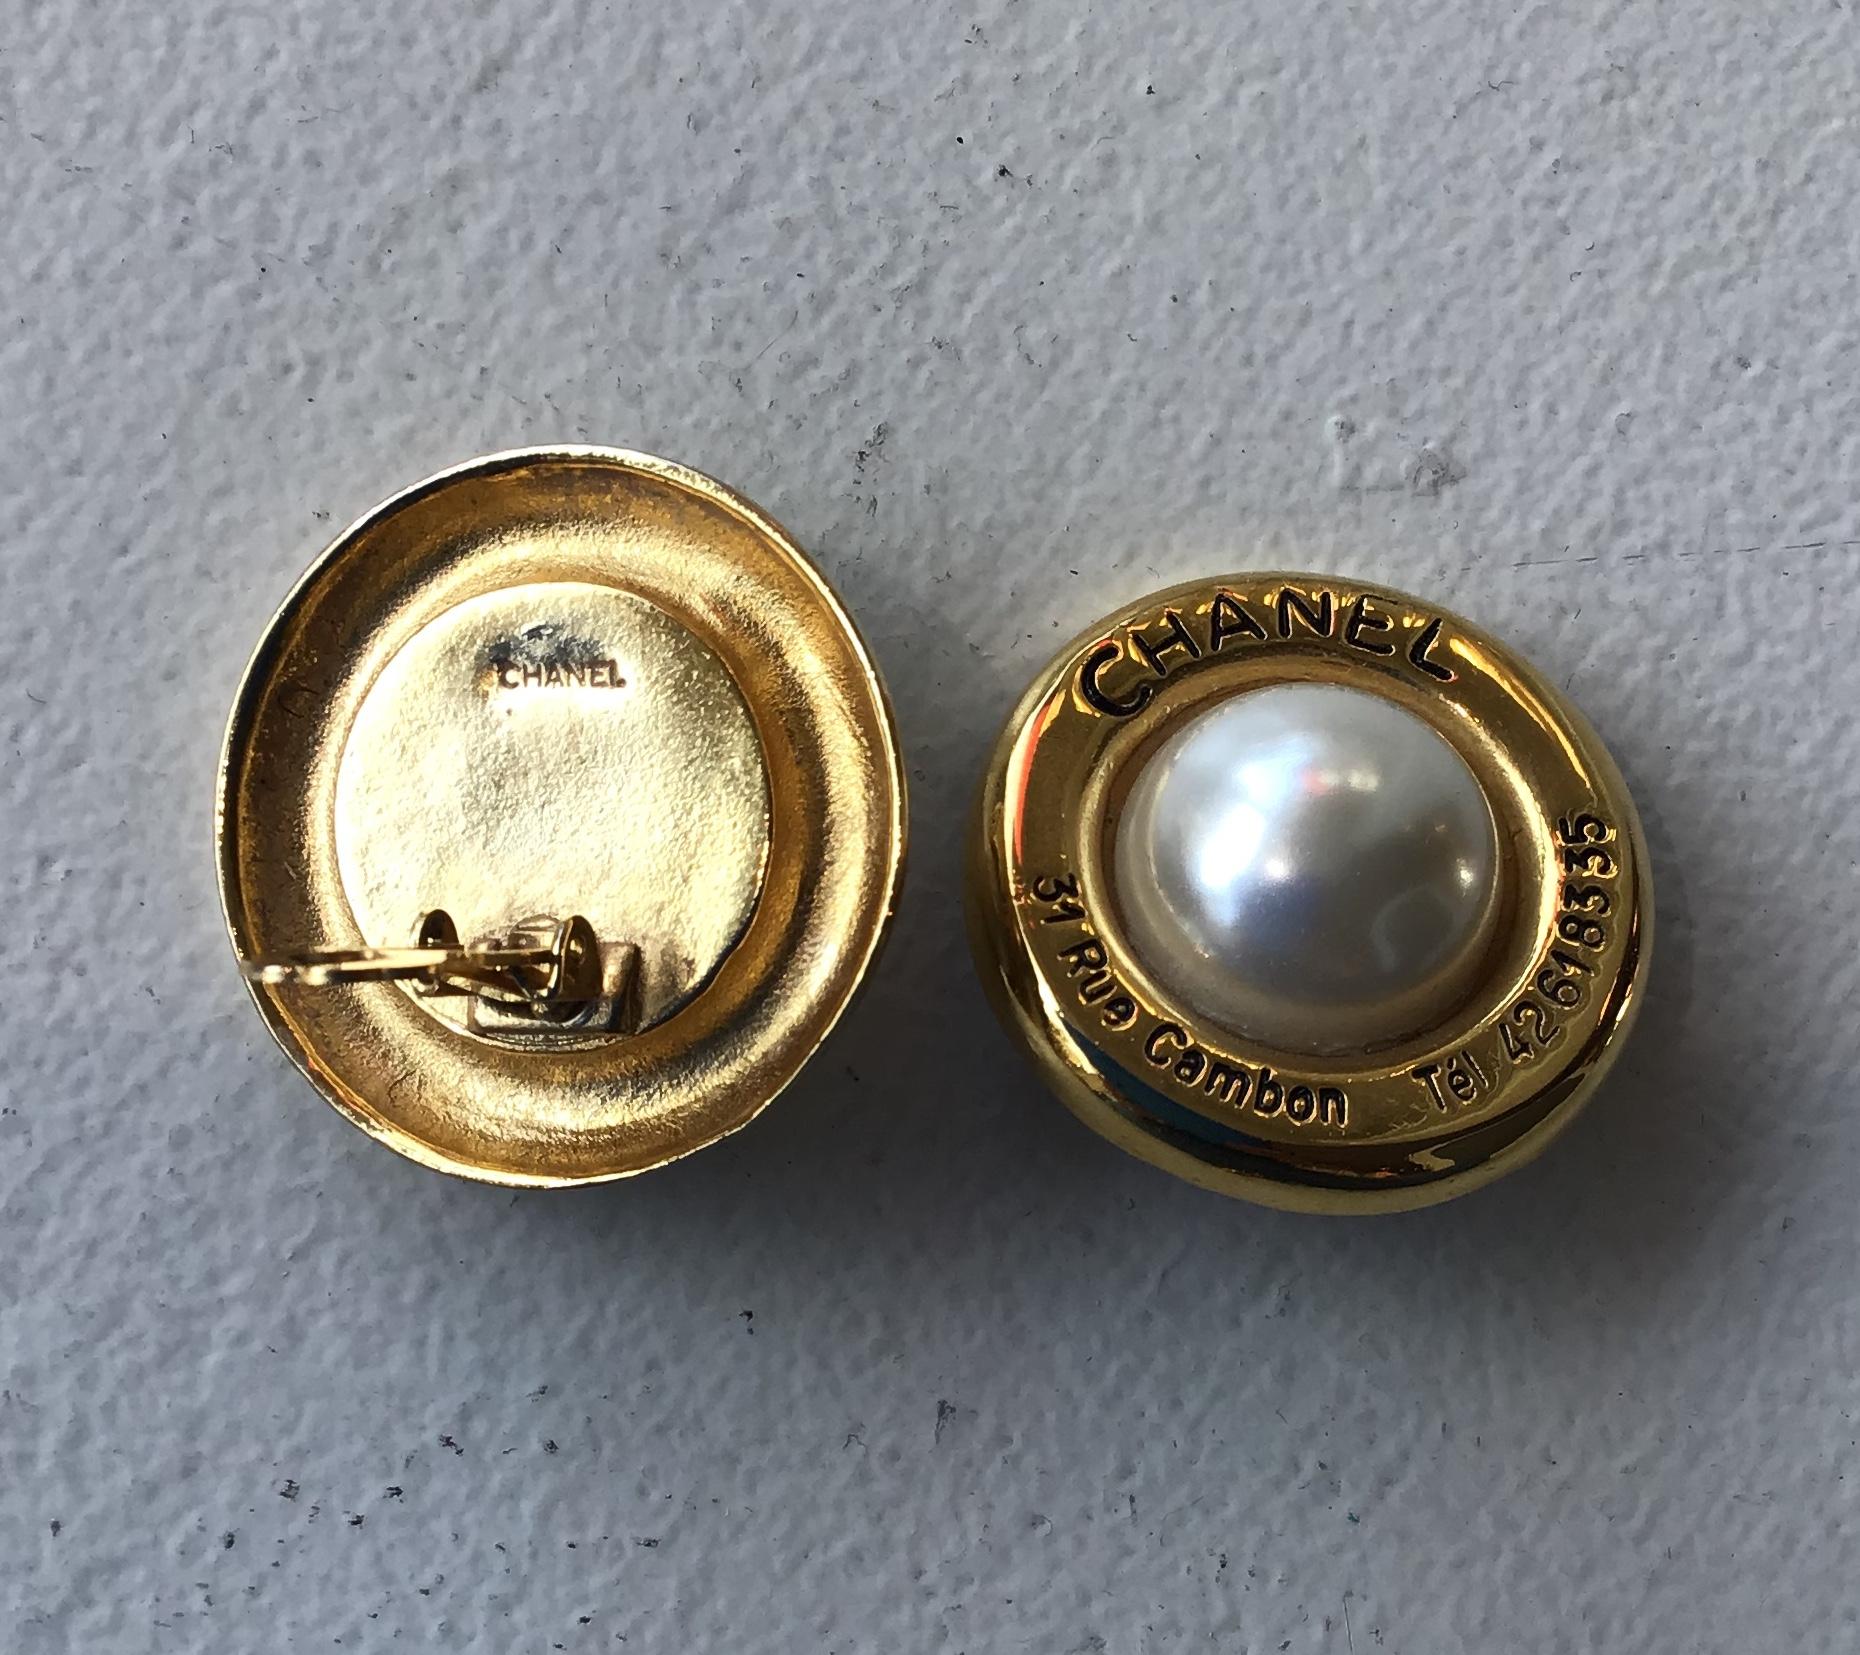 Chanel Gold Tone Cambon 31 Rue Faux Pearl Clip On Earrings. Vintage CHANEL (Circa 1954-1971) round clip on earrings come in yellow gold tone metal with 